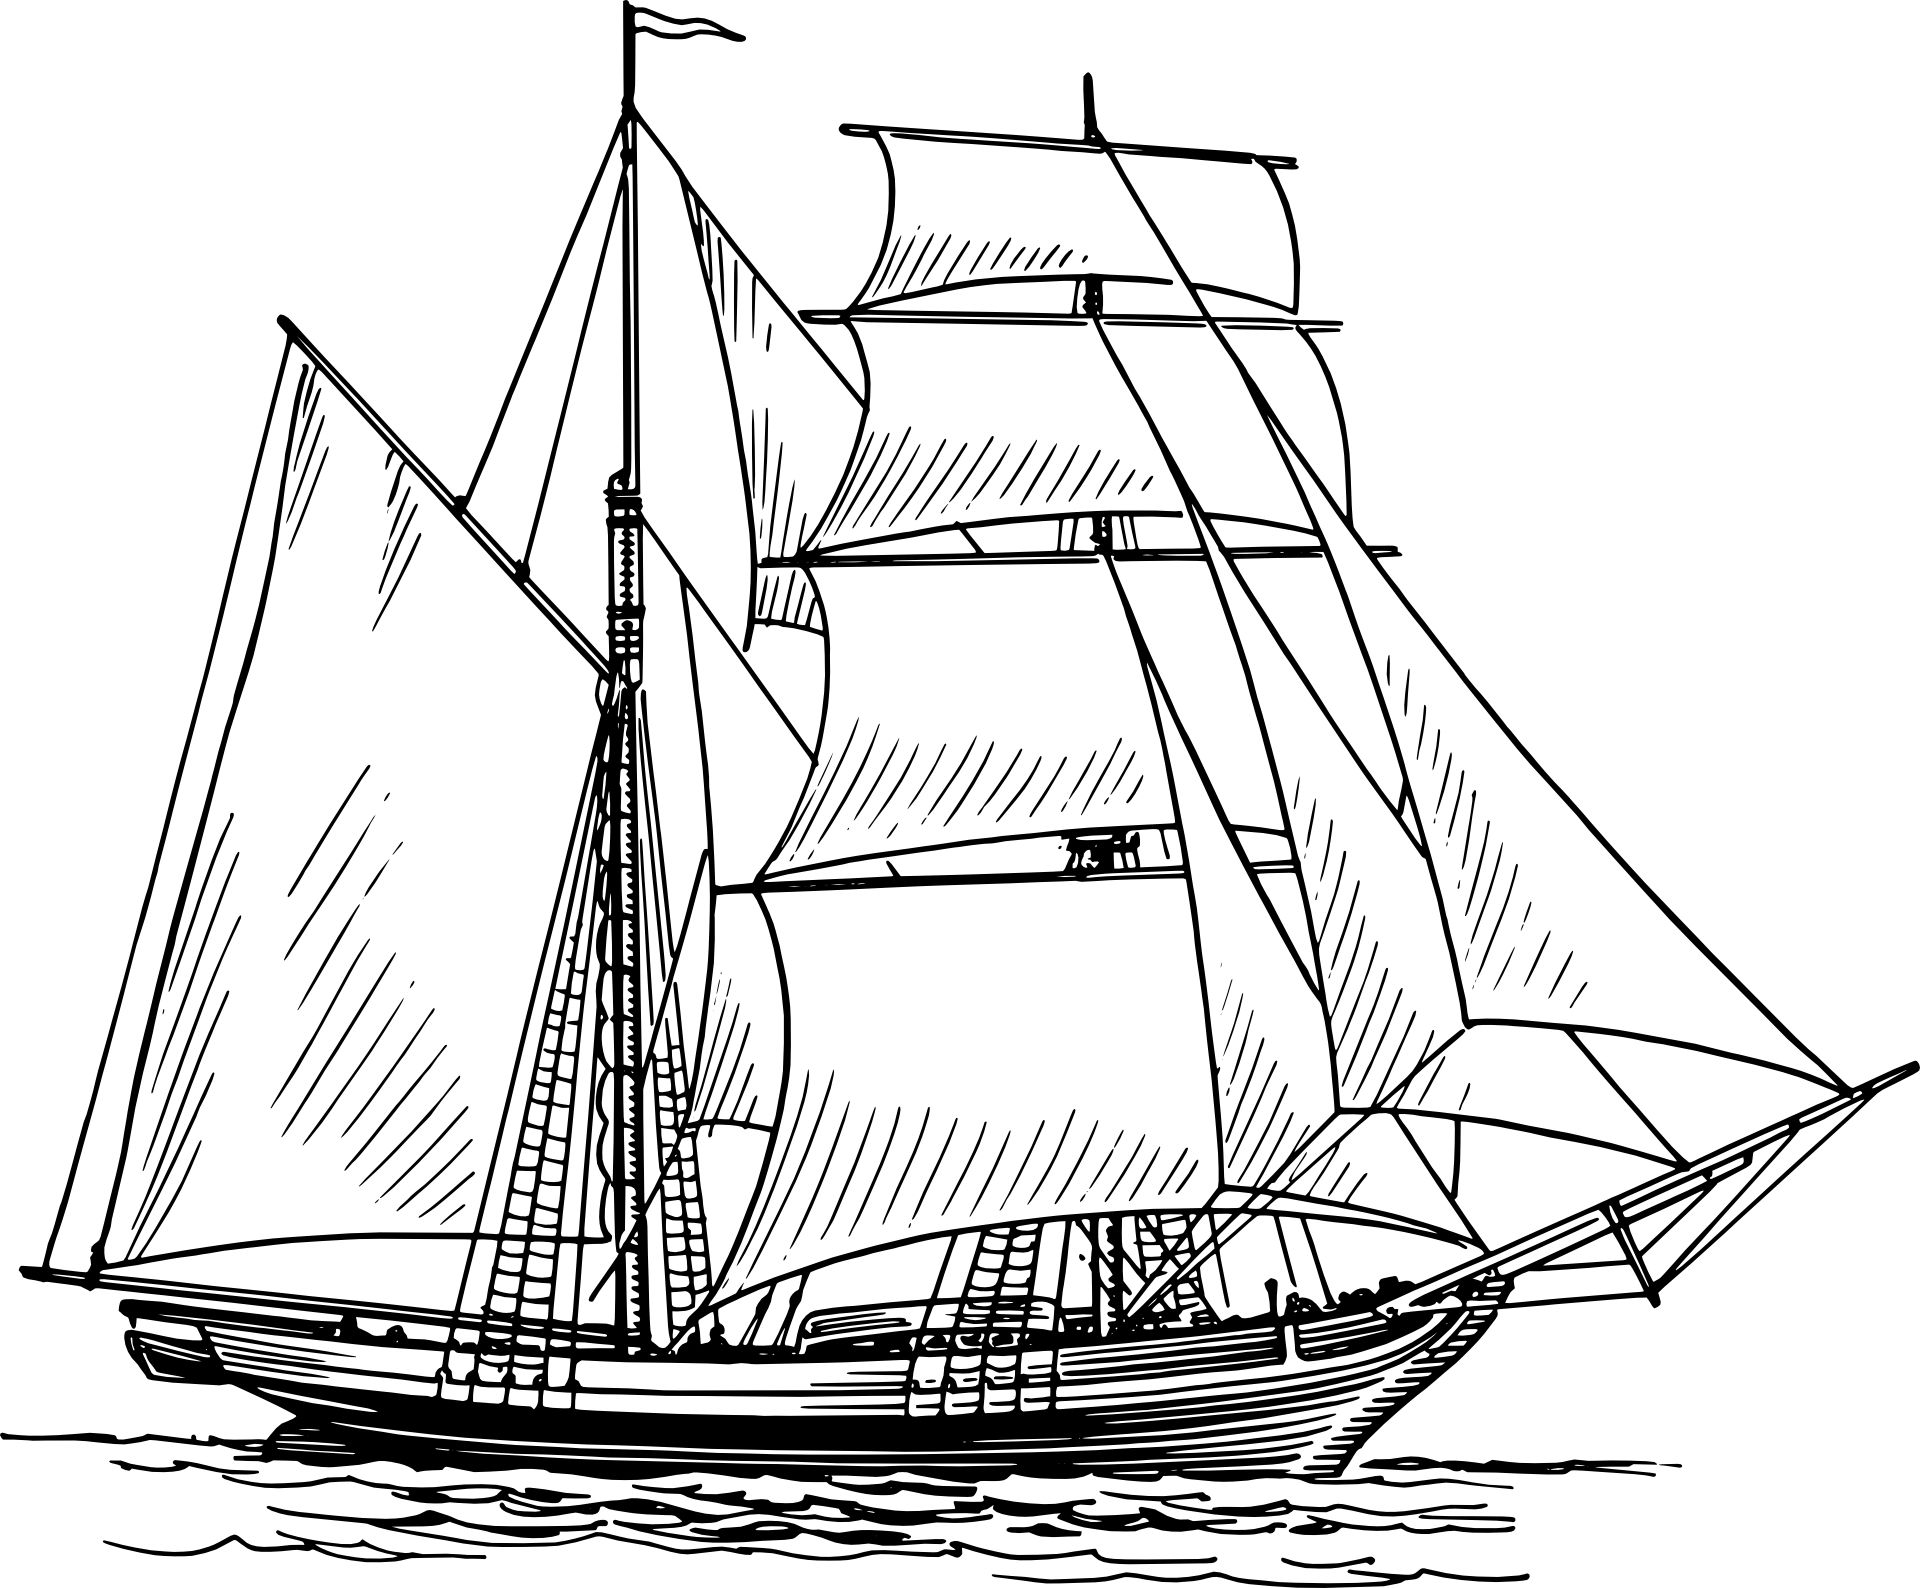 Boats clipart old fashioned, Boats old fashioned Transparent